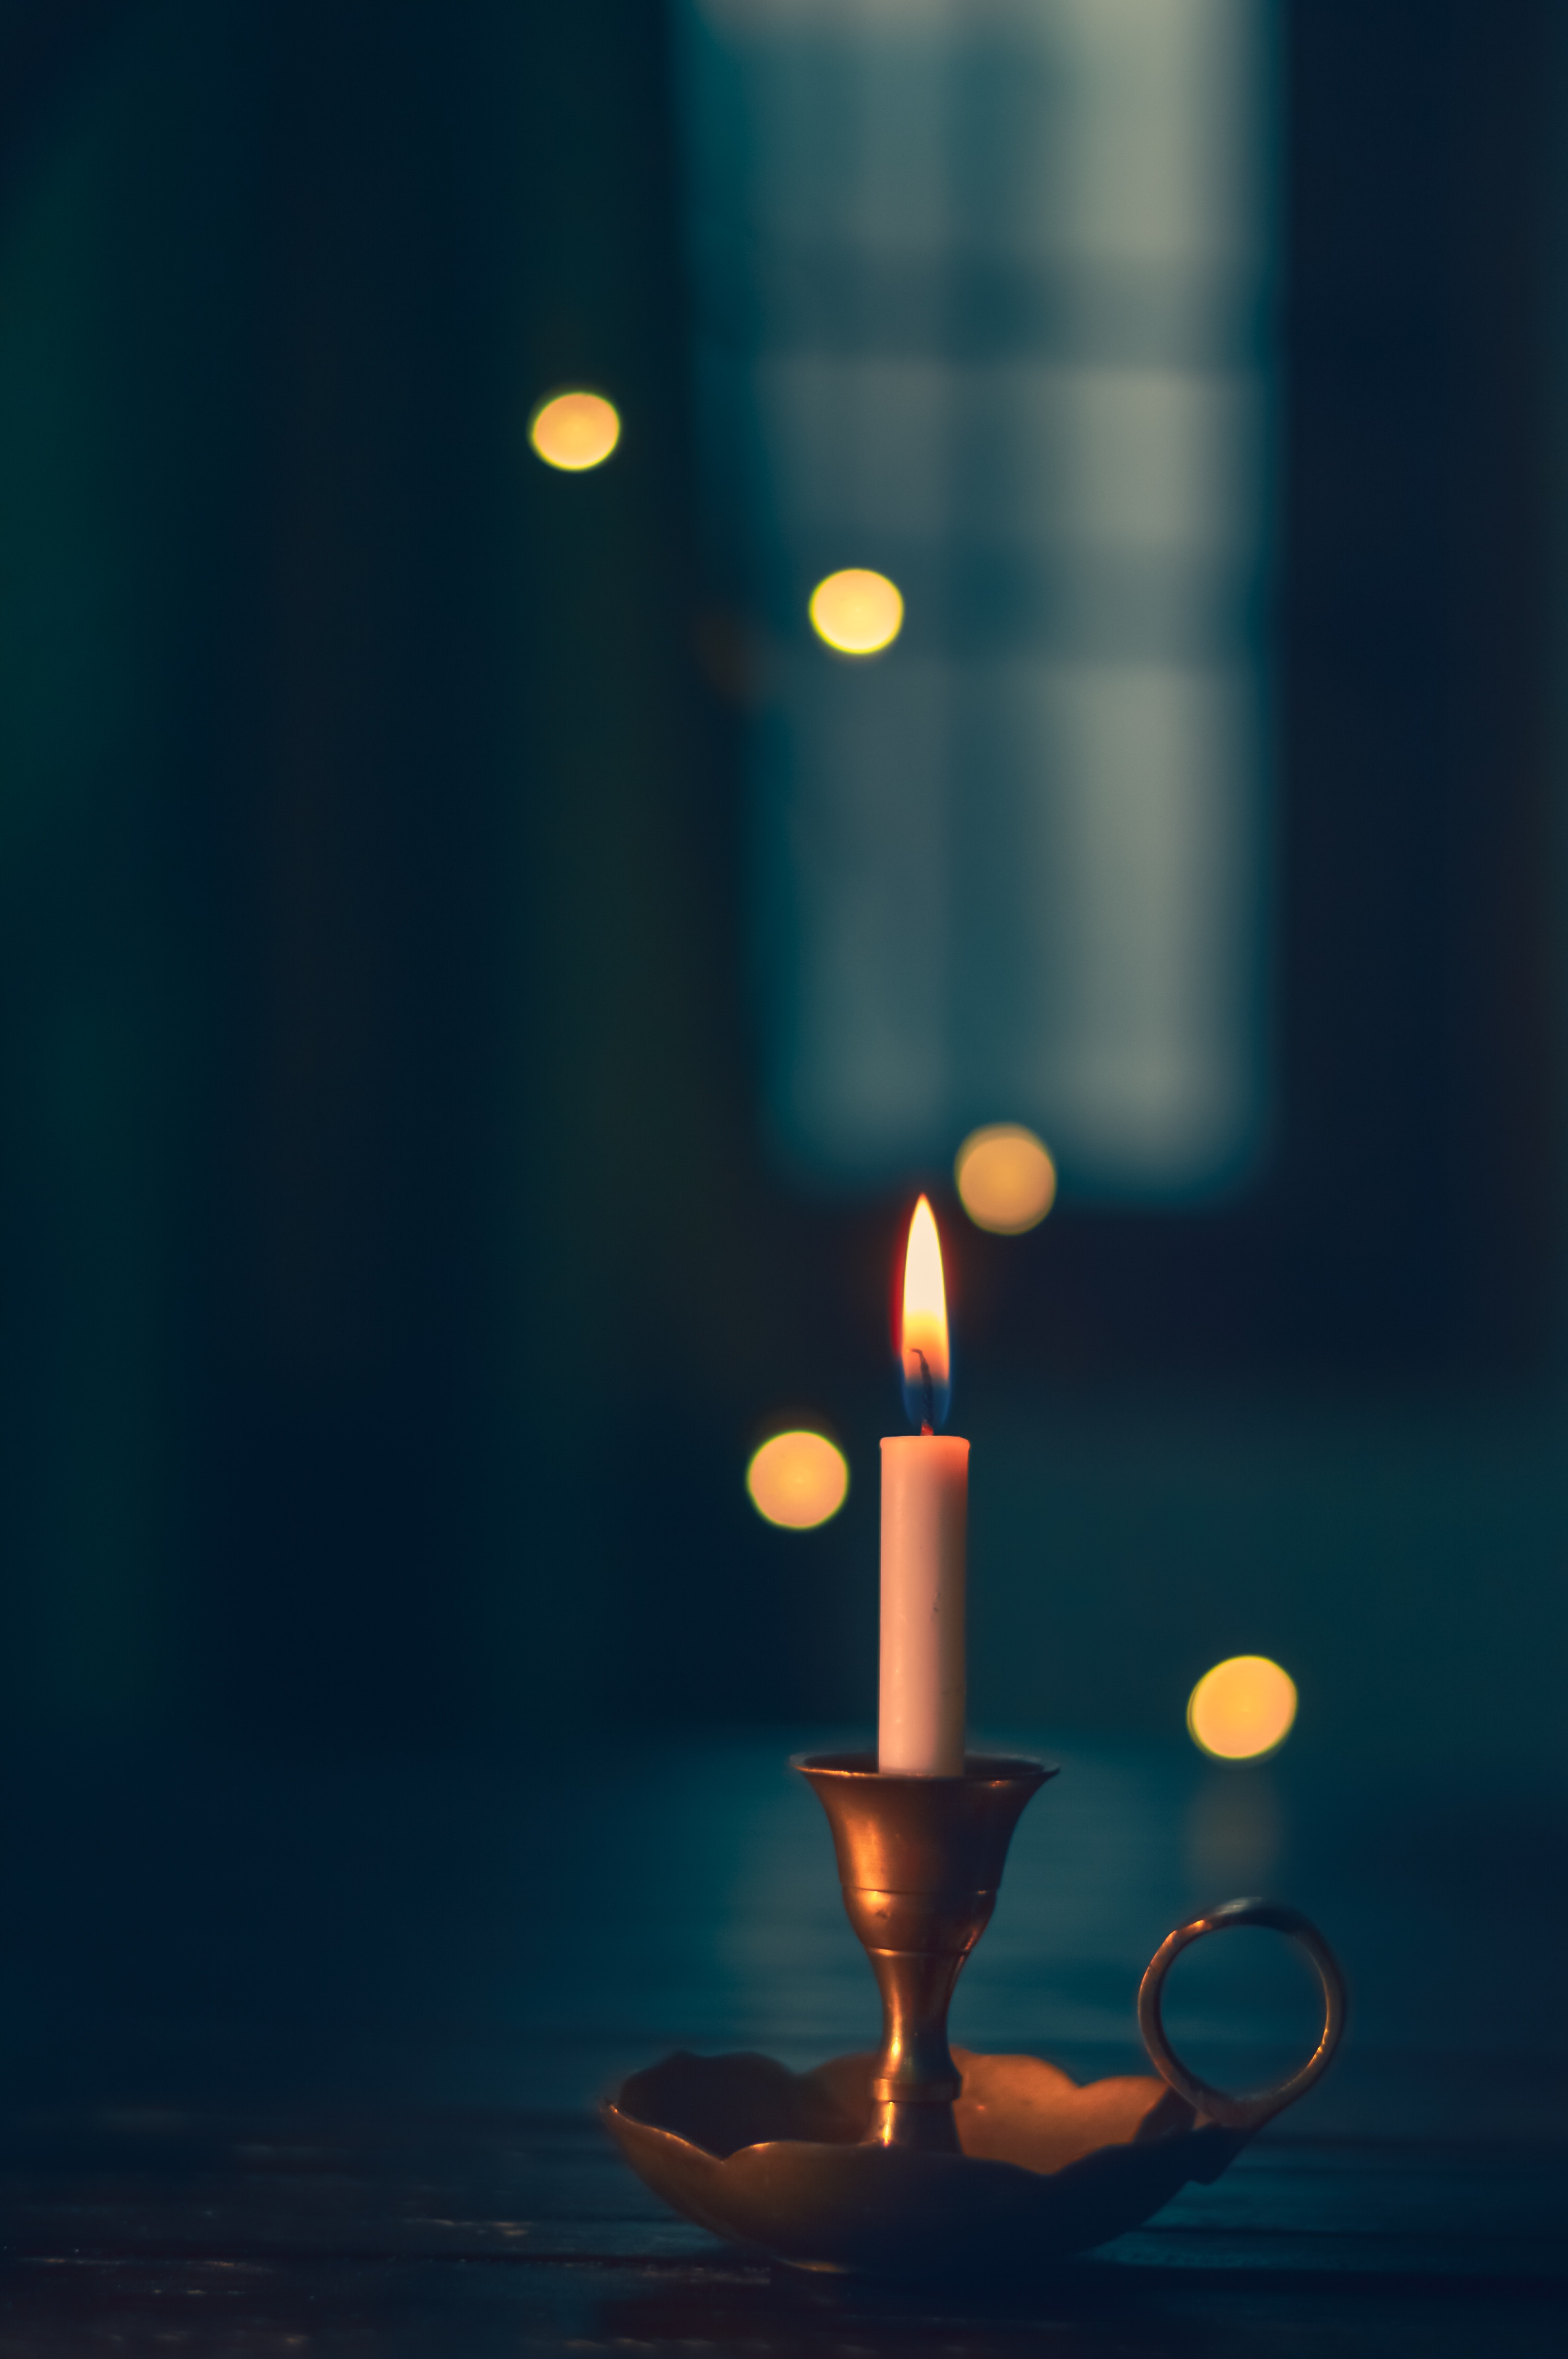 blur, miscellanea, candlestick, candle, wick, wax, fire, miscellaneous, smooth